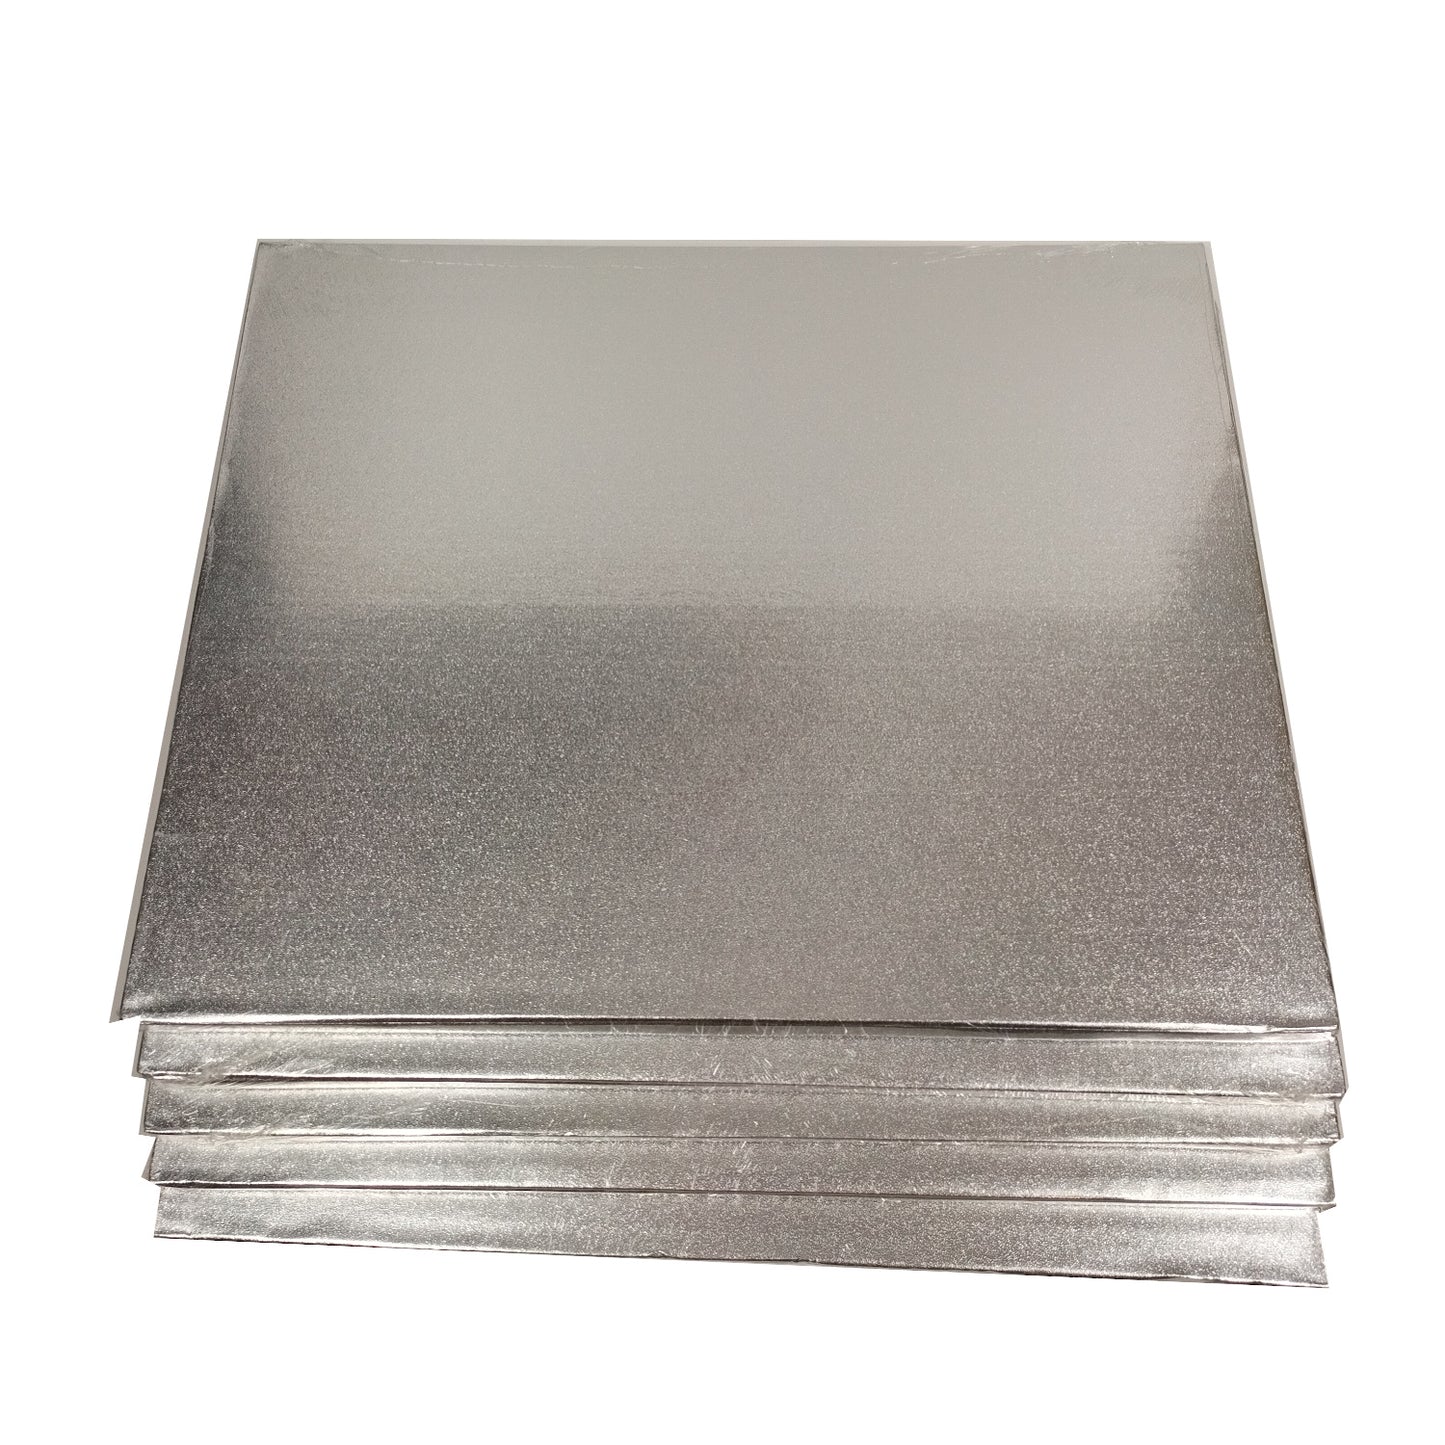 5x Cakeboard Silber 45x35cm